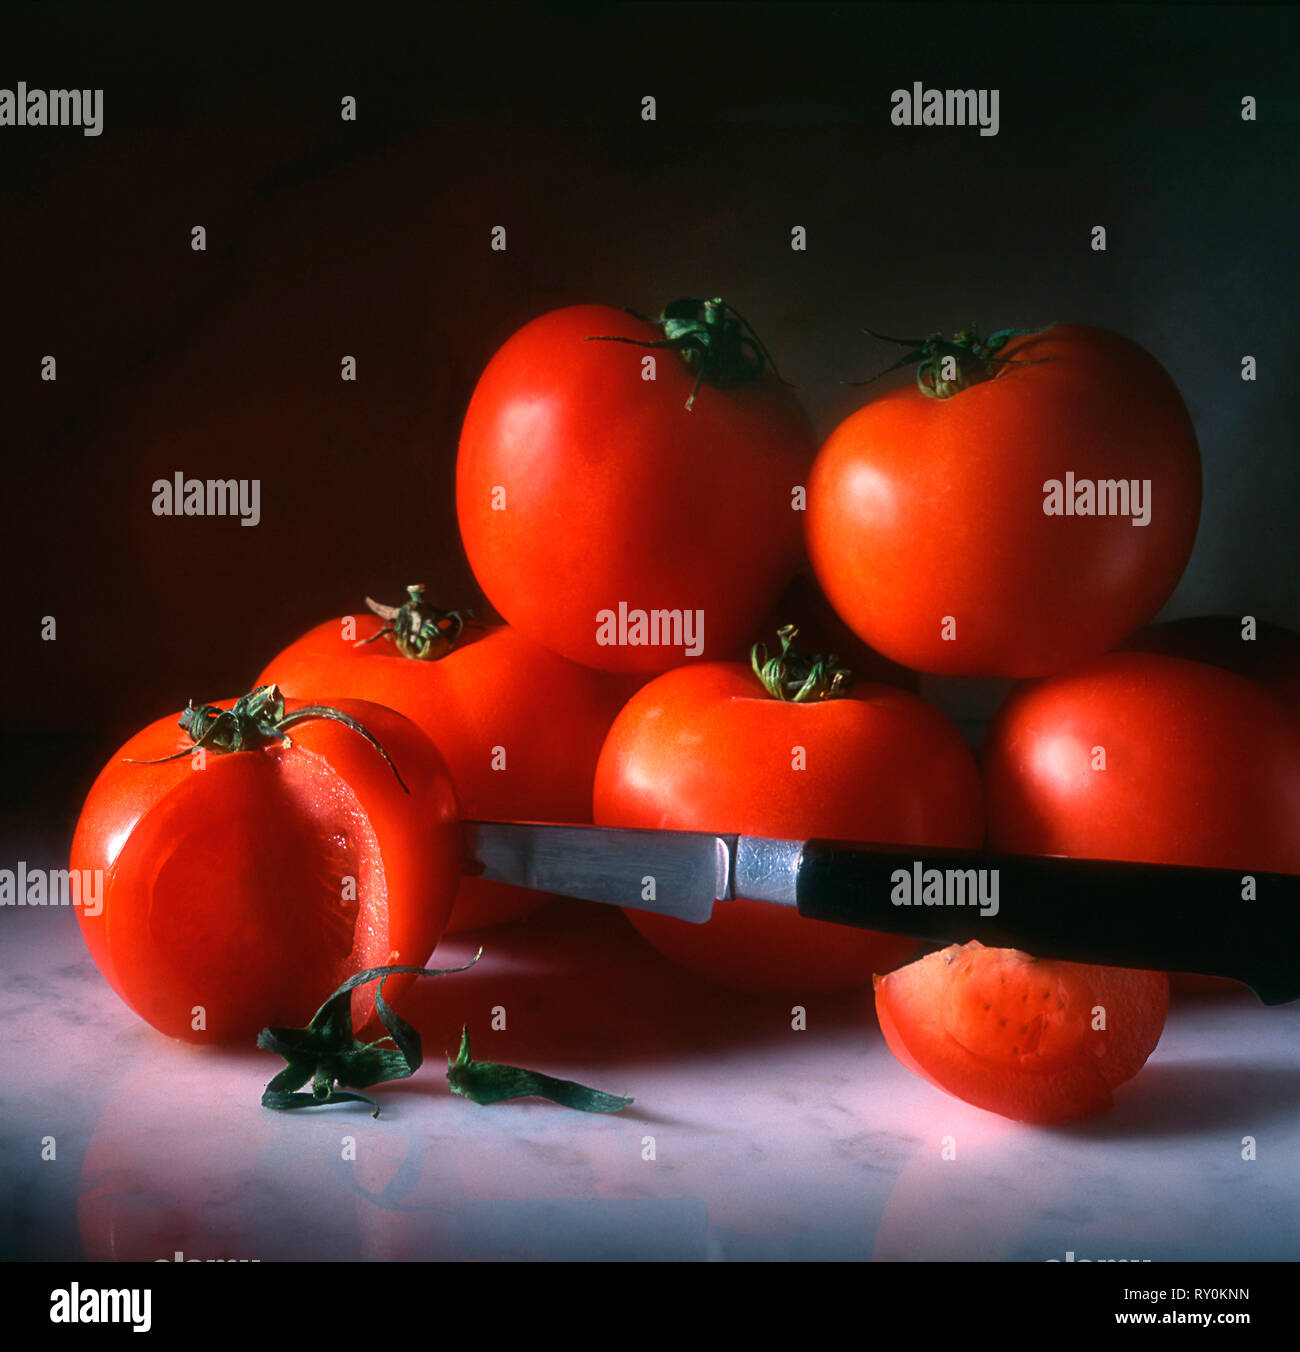 Bunch of tomatoes and knife in a slice on a marble table Stock Photo